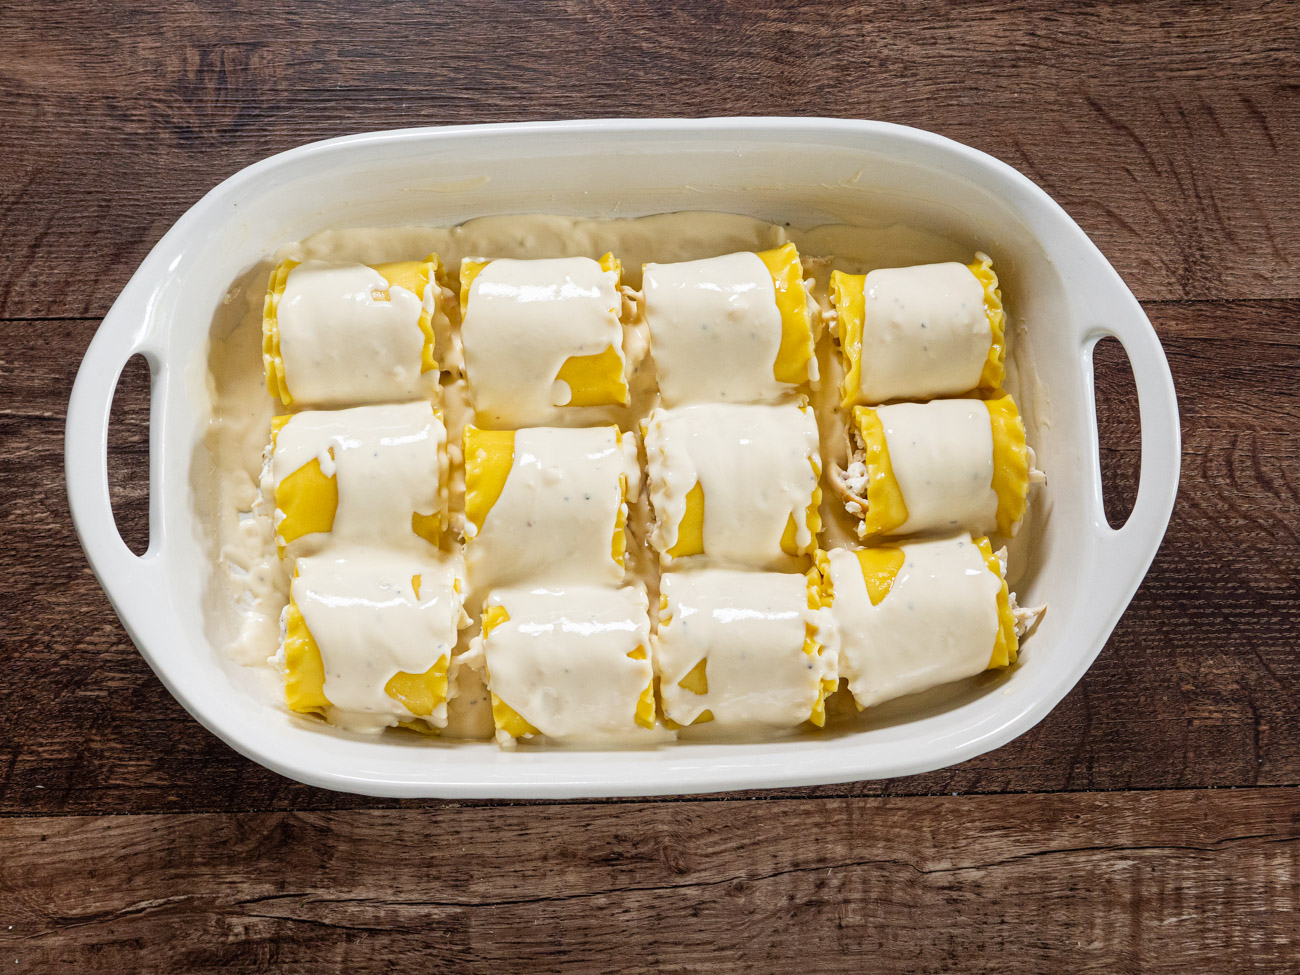 Place each lasagna roll up into the prepared casserole dish. Pour the remaining alfredo sauce over the lasagna roll-ups. Top with shredded mozzarella and parmesan cheese.